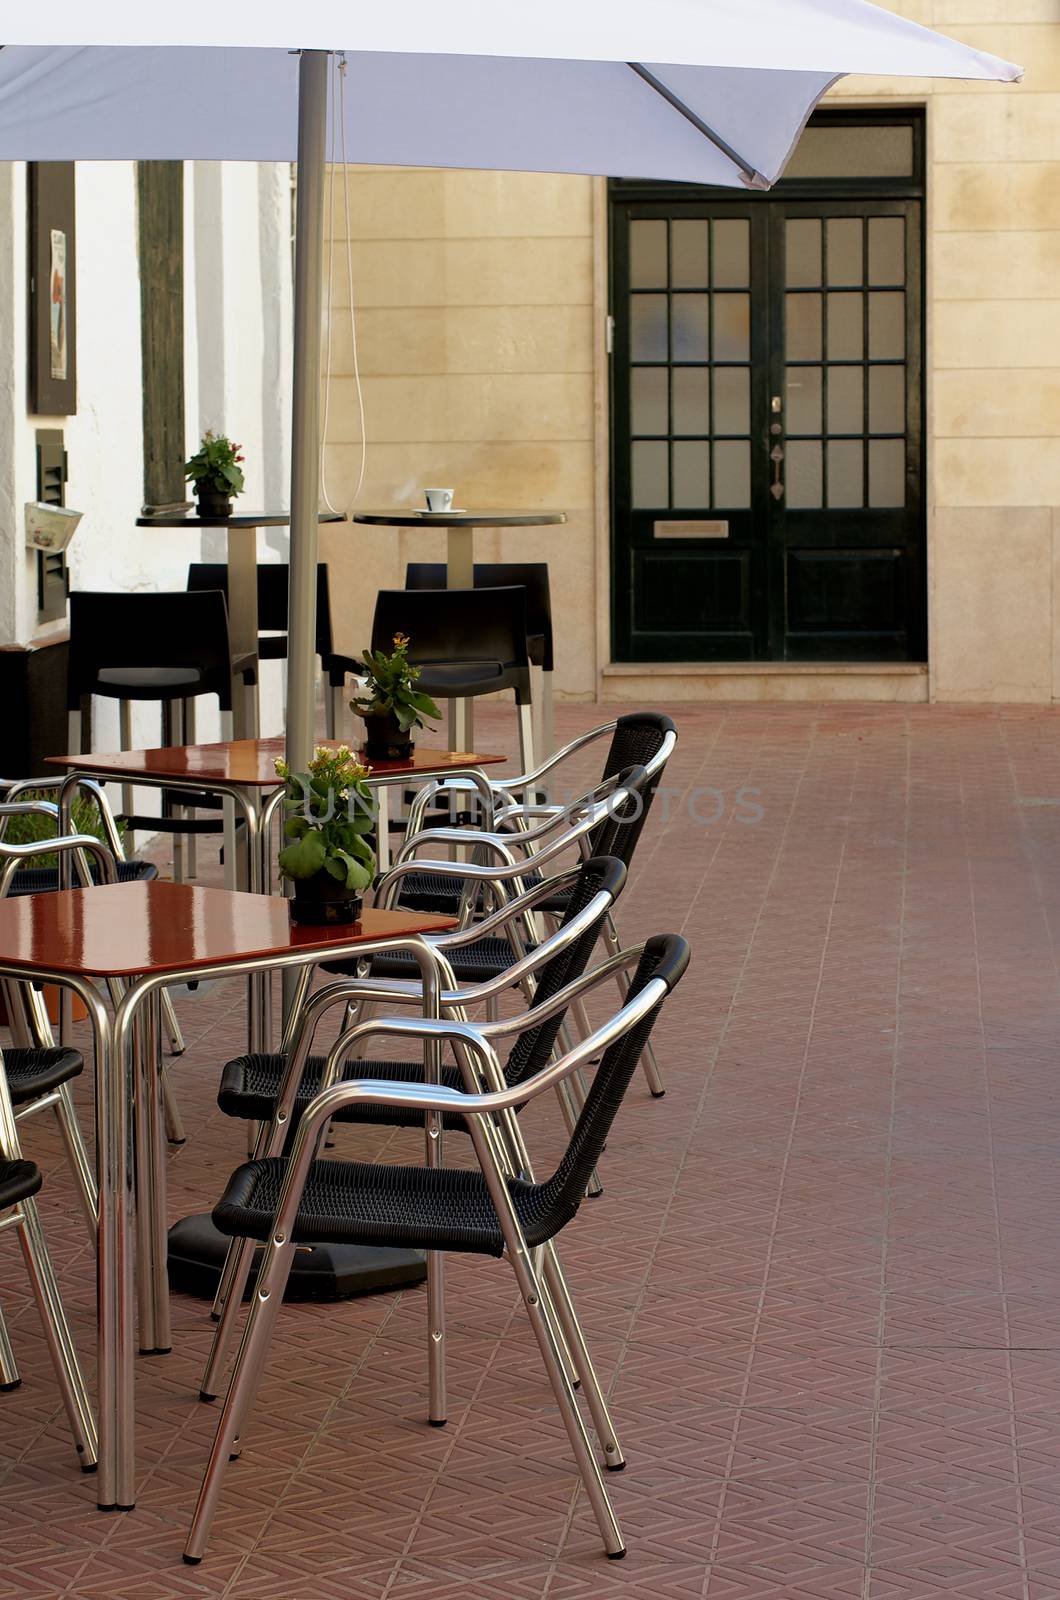 Elegant Street Cafe with Flower Pots, Wooden Tables and Stainless Steel Chairs Outdoors. Focus on Foreground